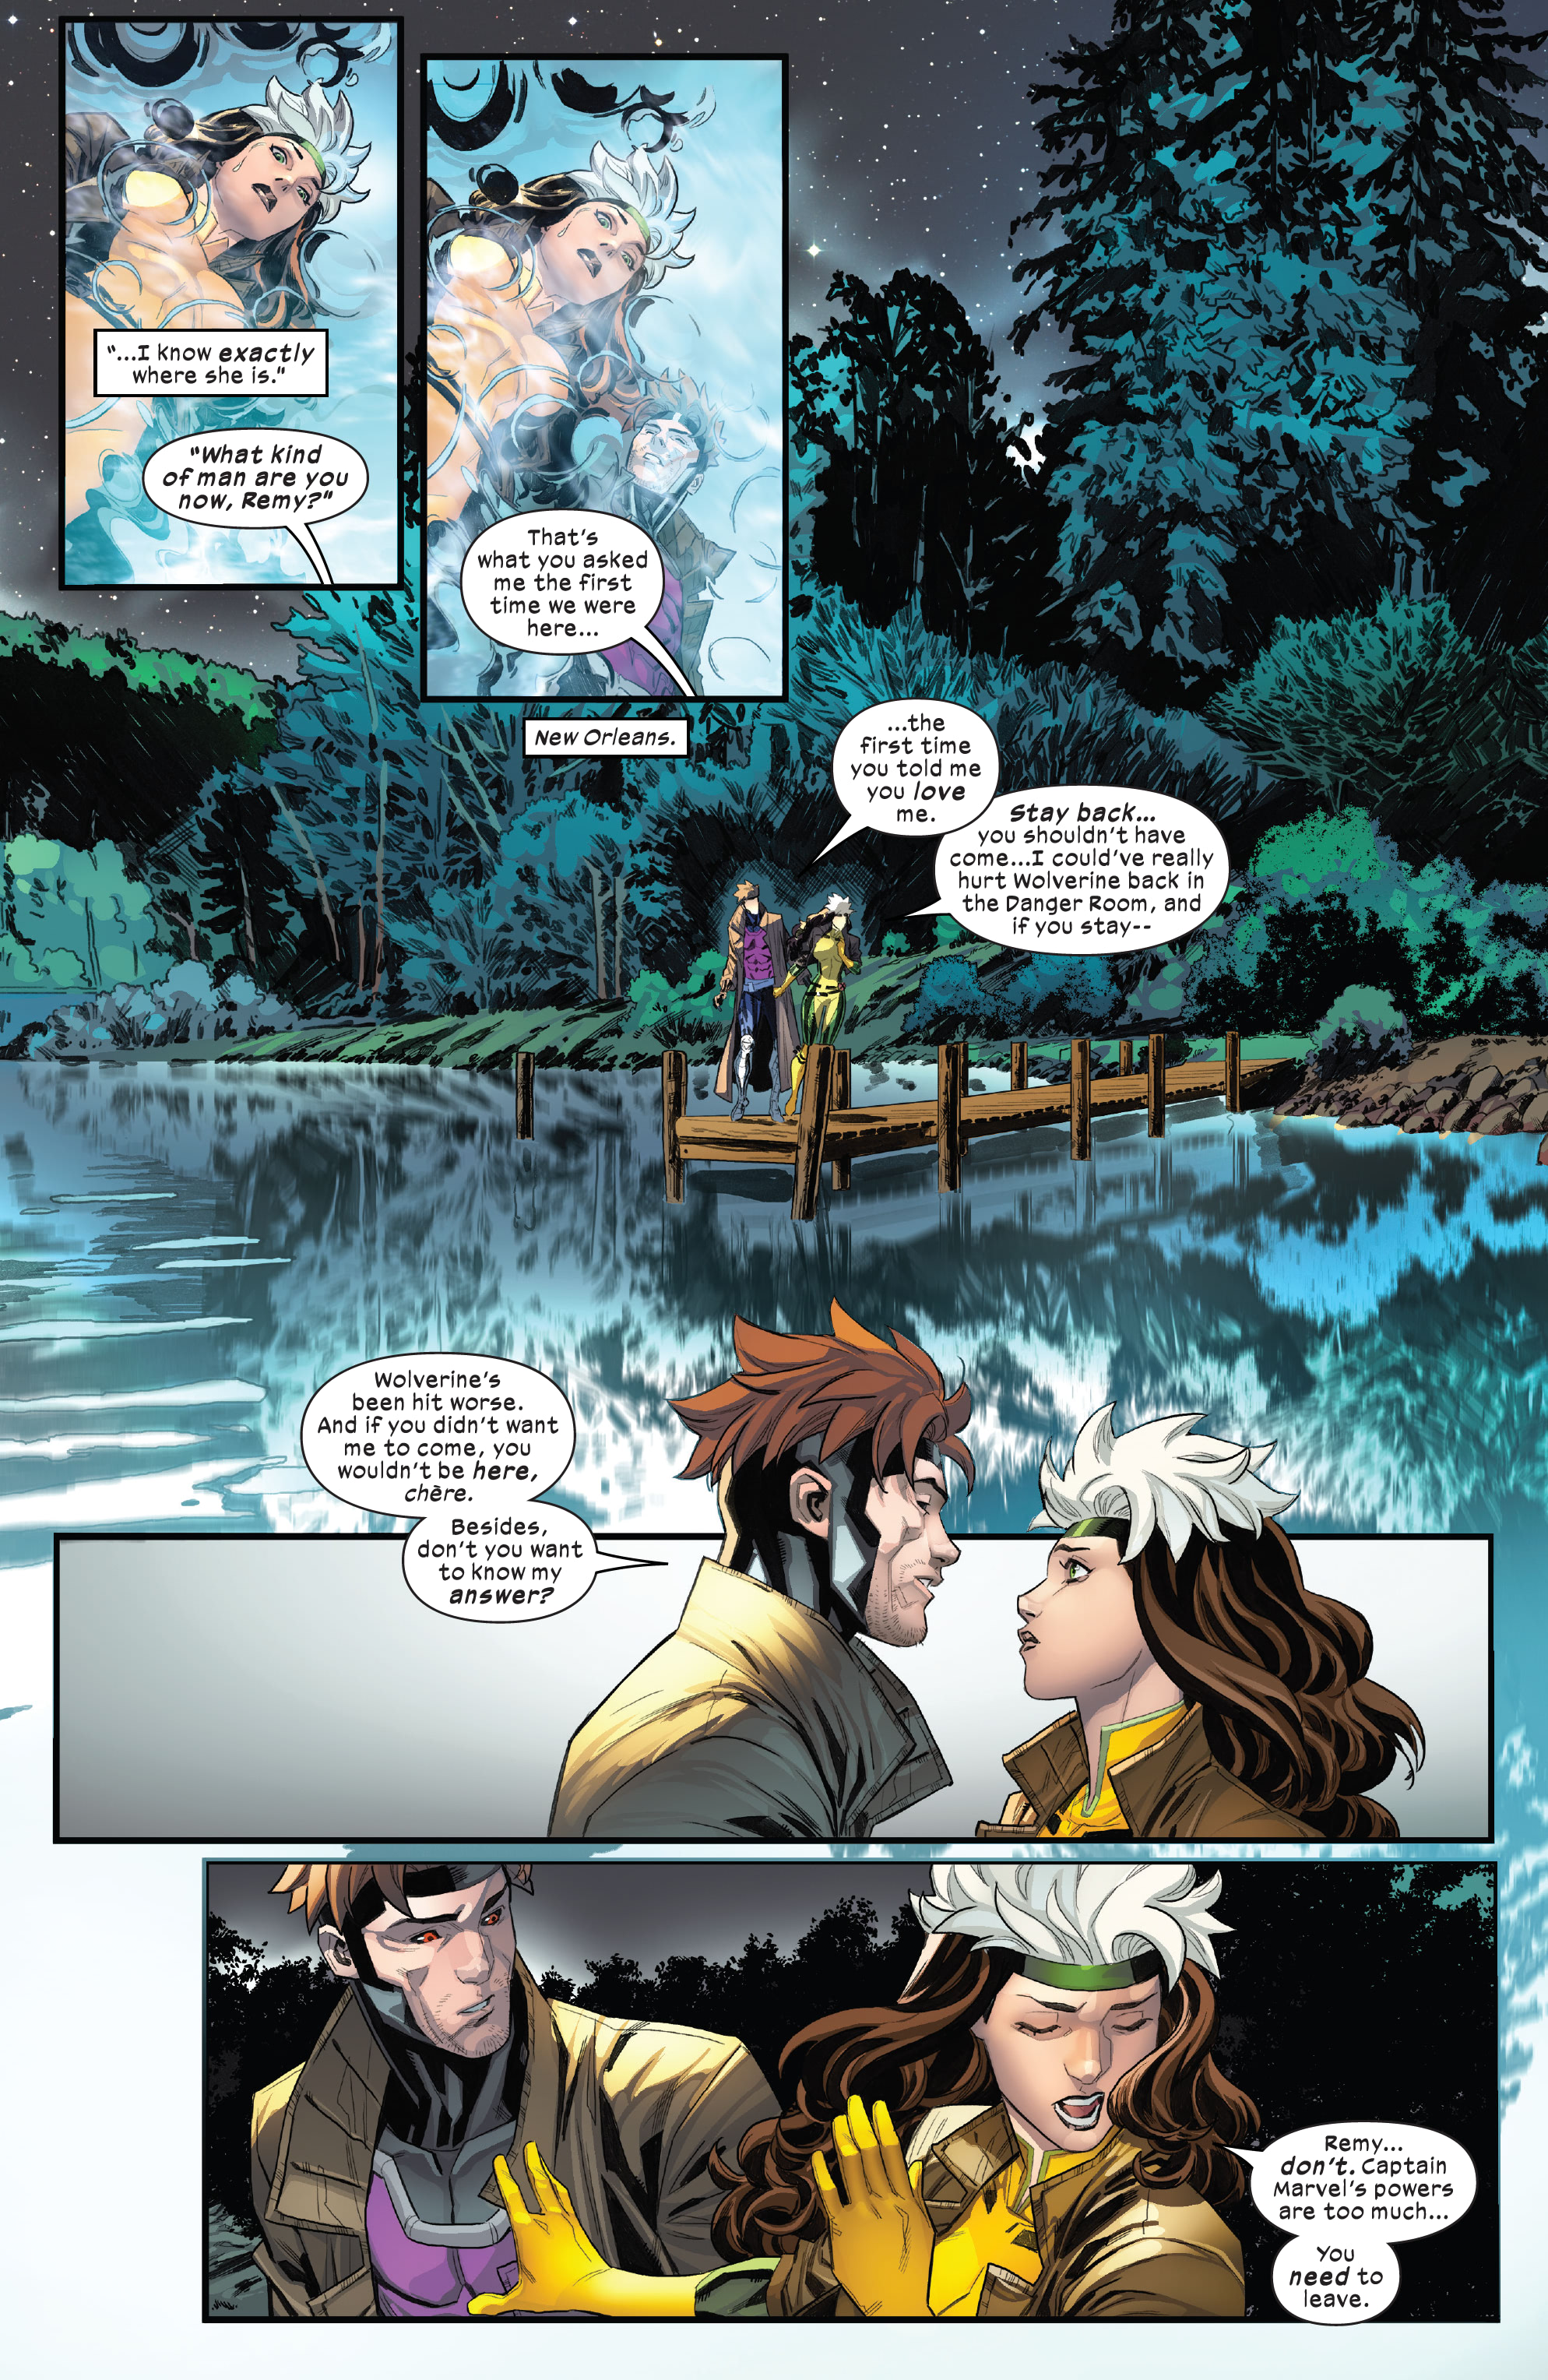 GAMBIT: Page 8 of 8